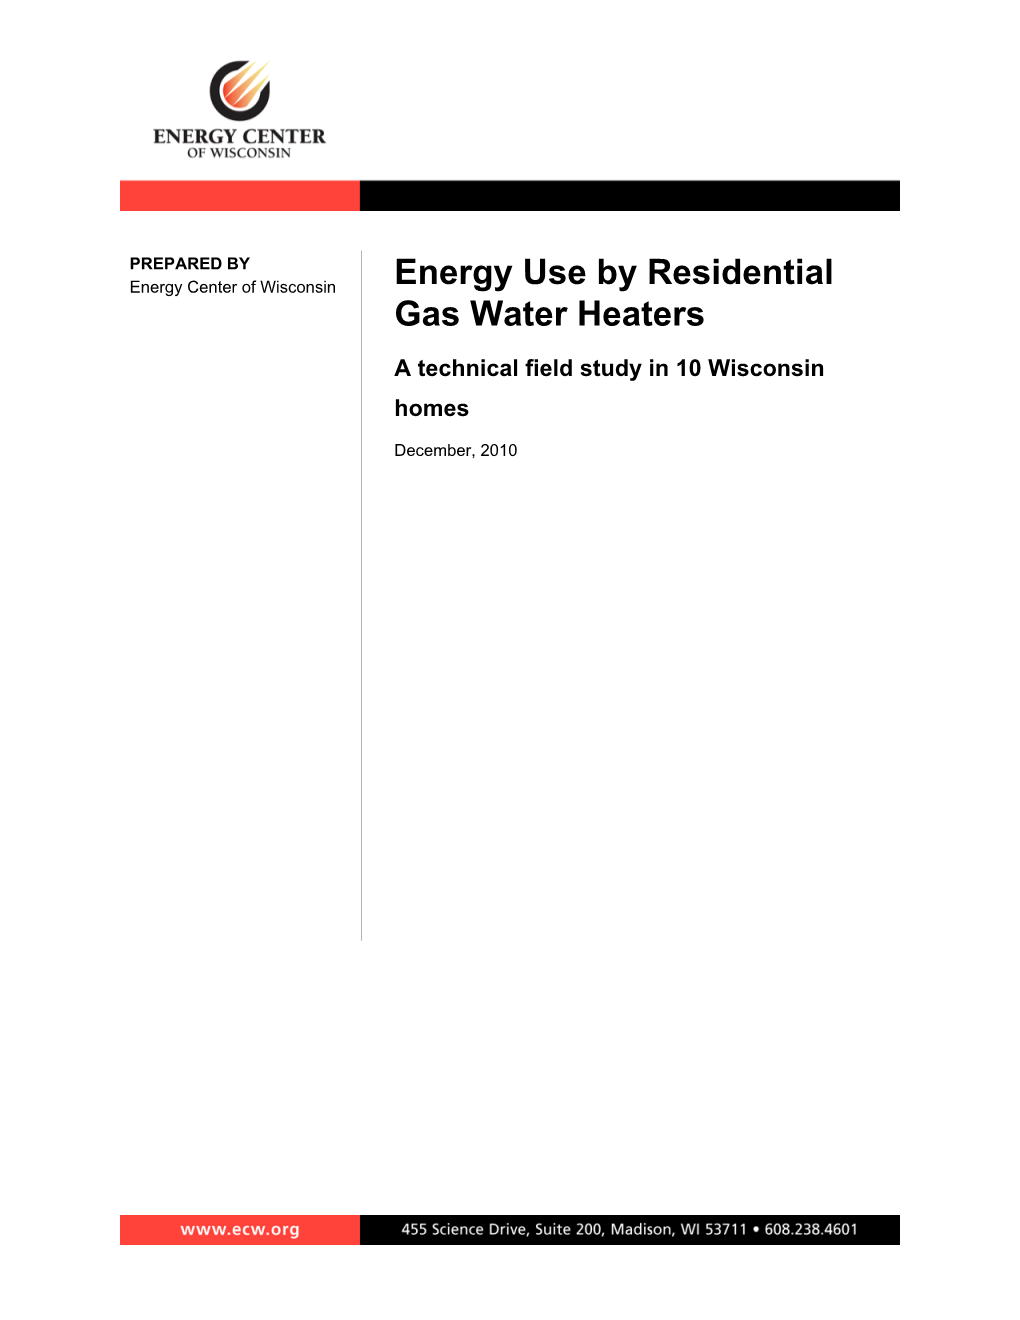 Energy Use by Residential Gas Water Heaters